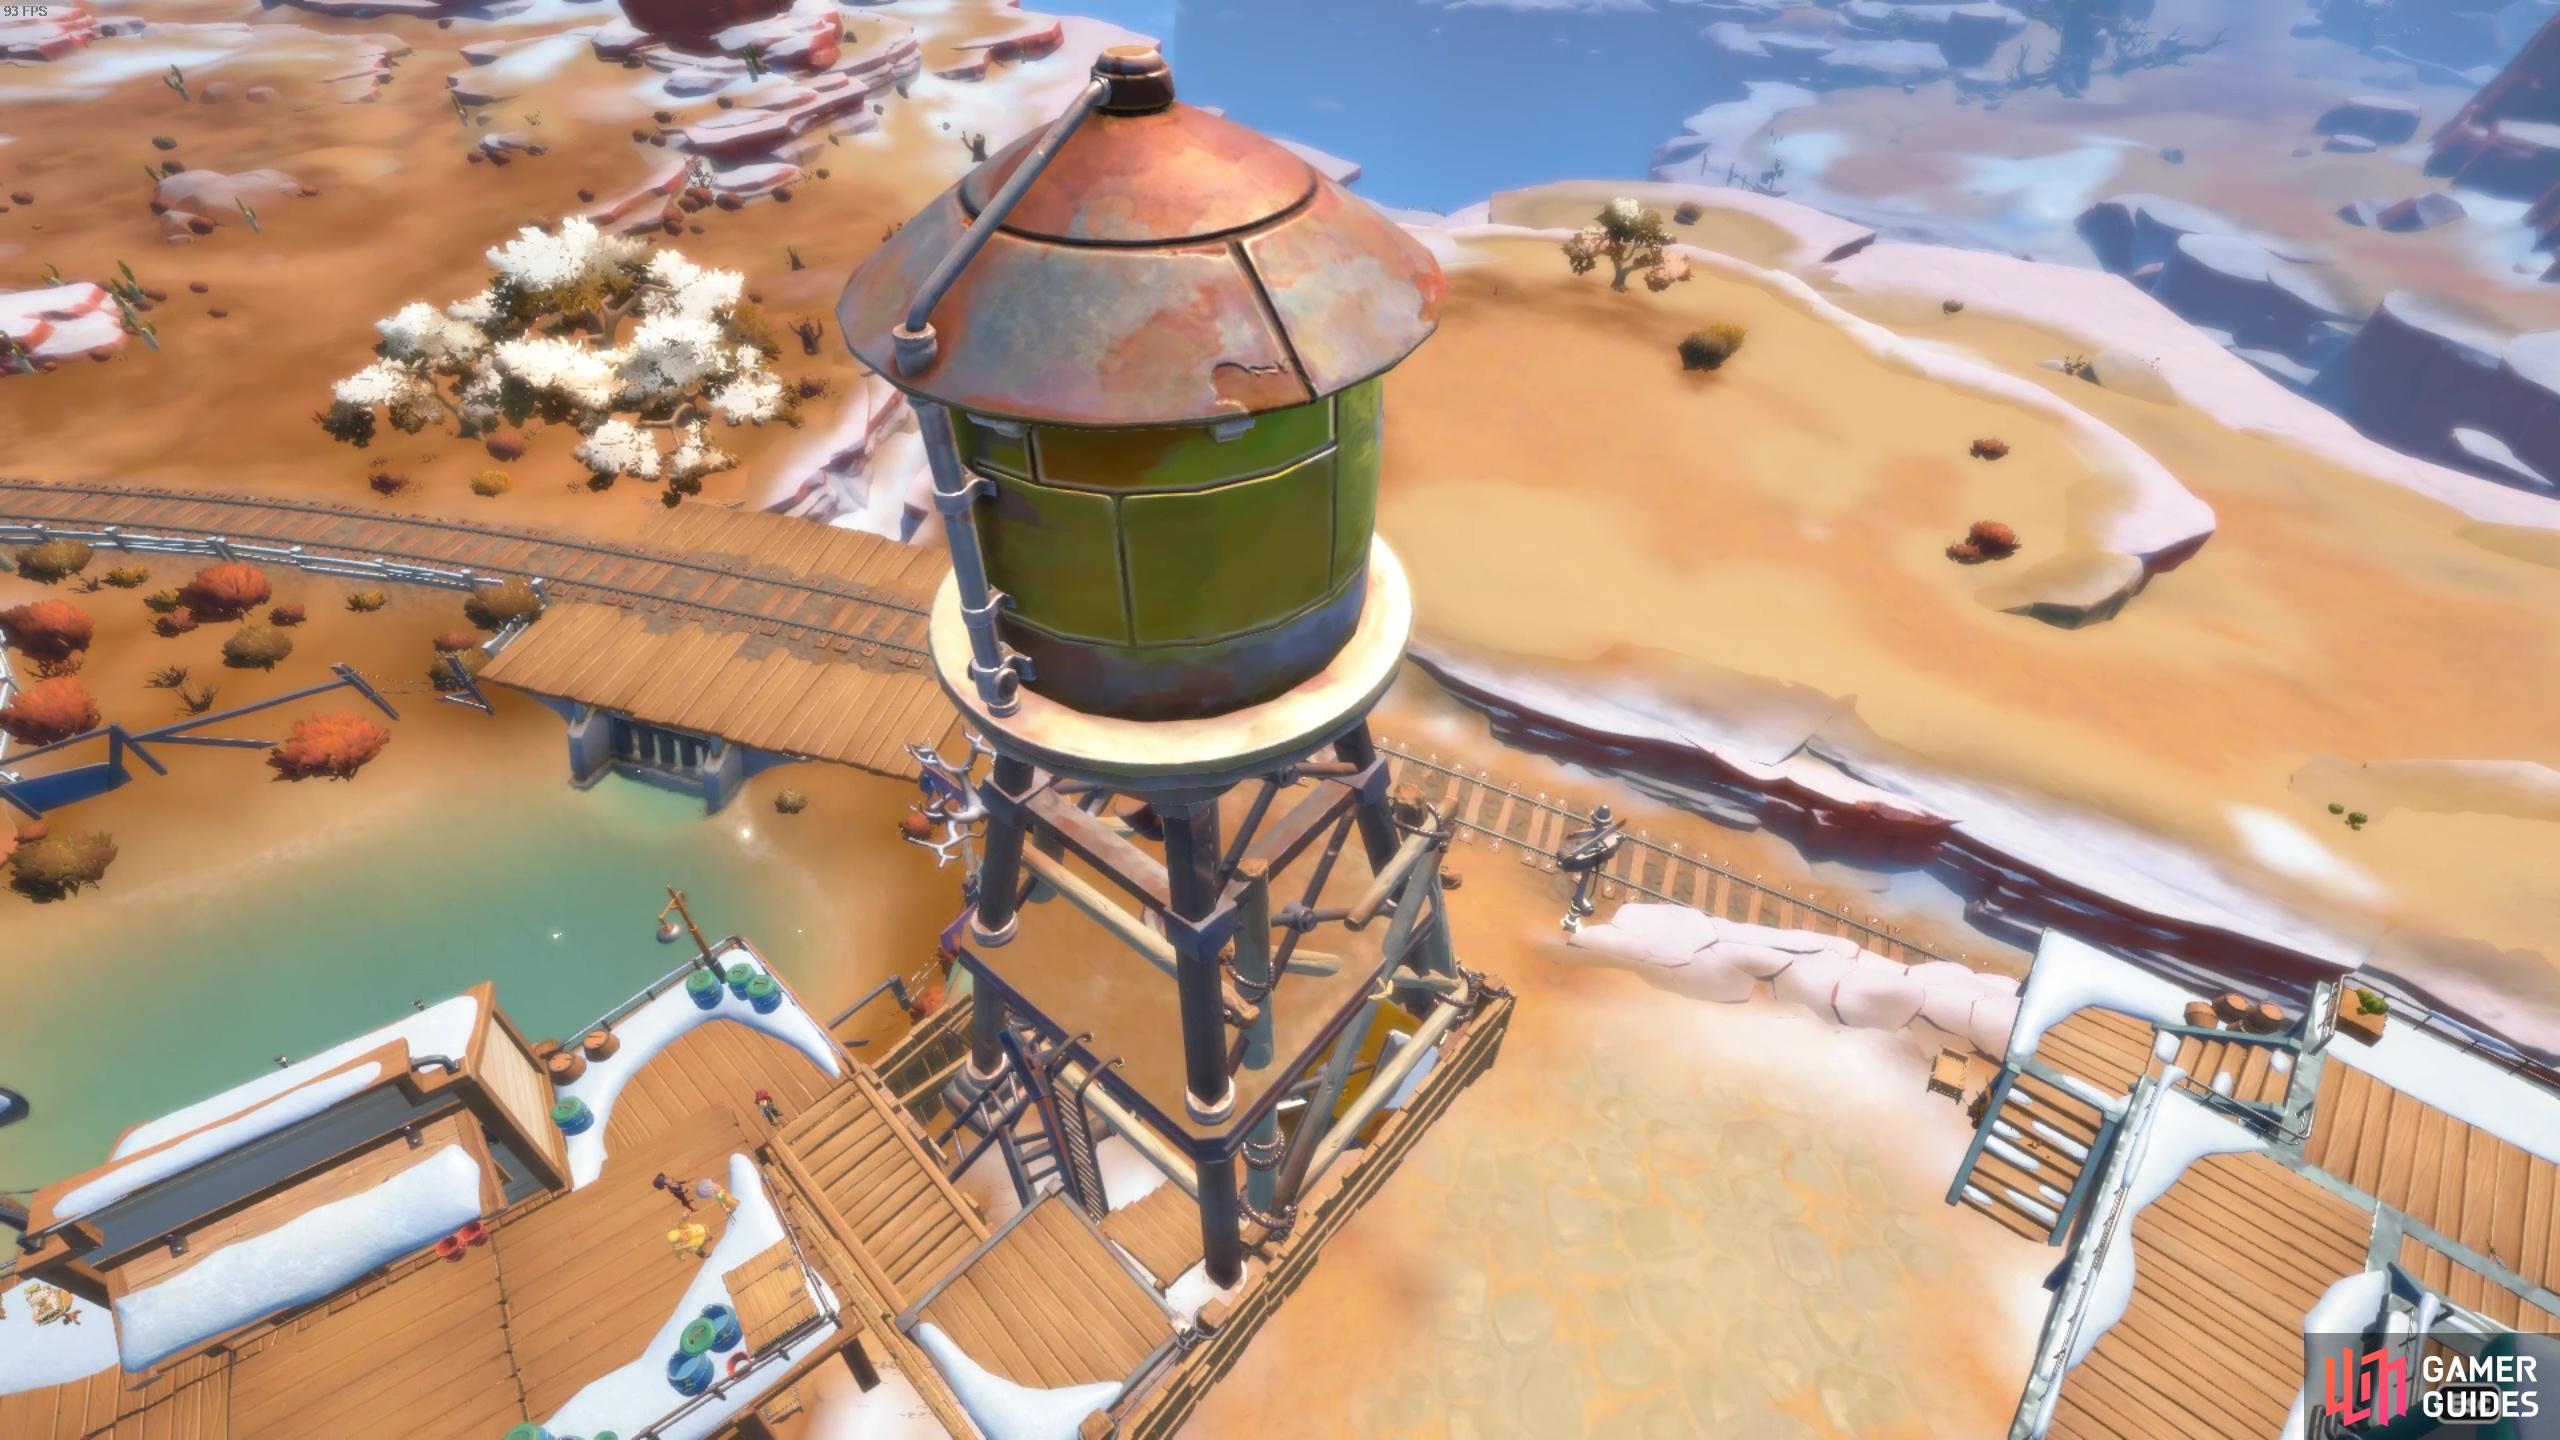 It’s time to fix up a new Water Tower for the town!